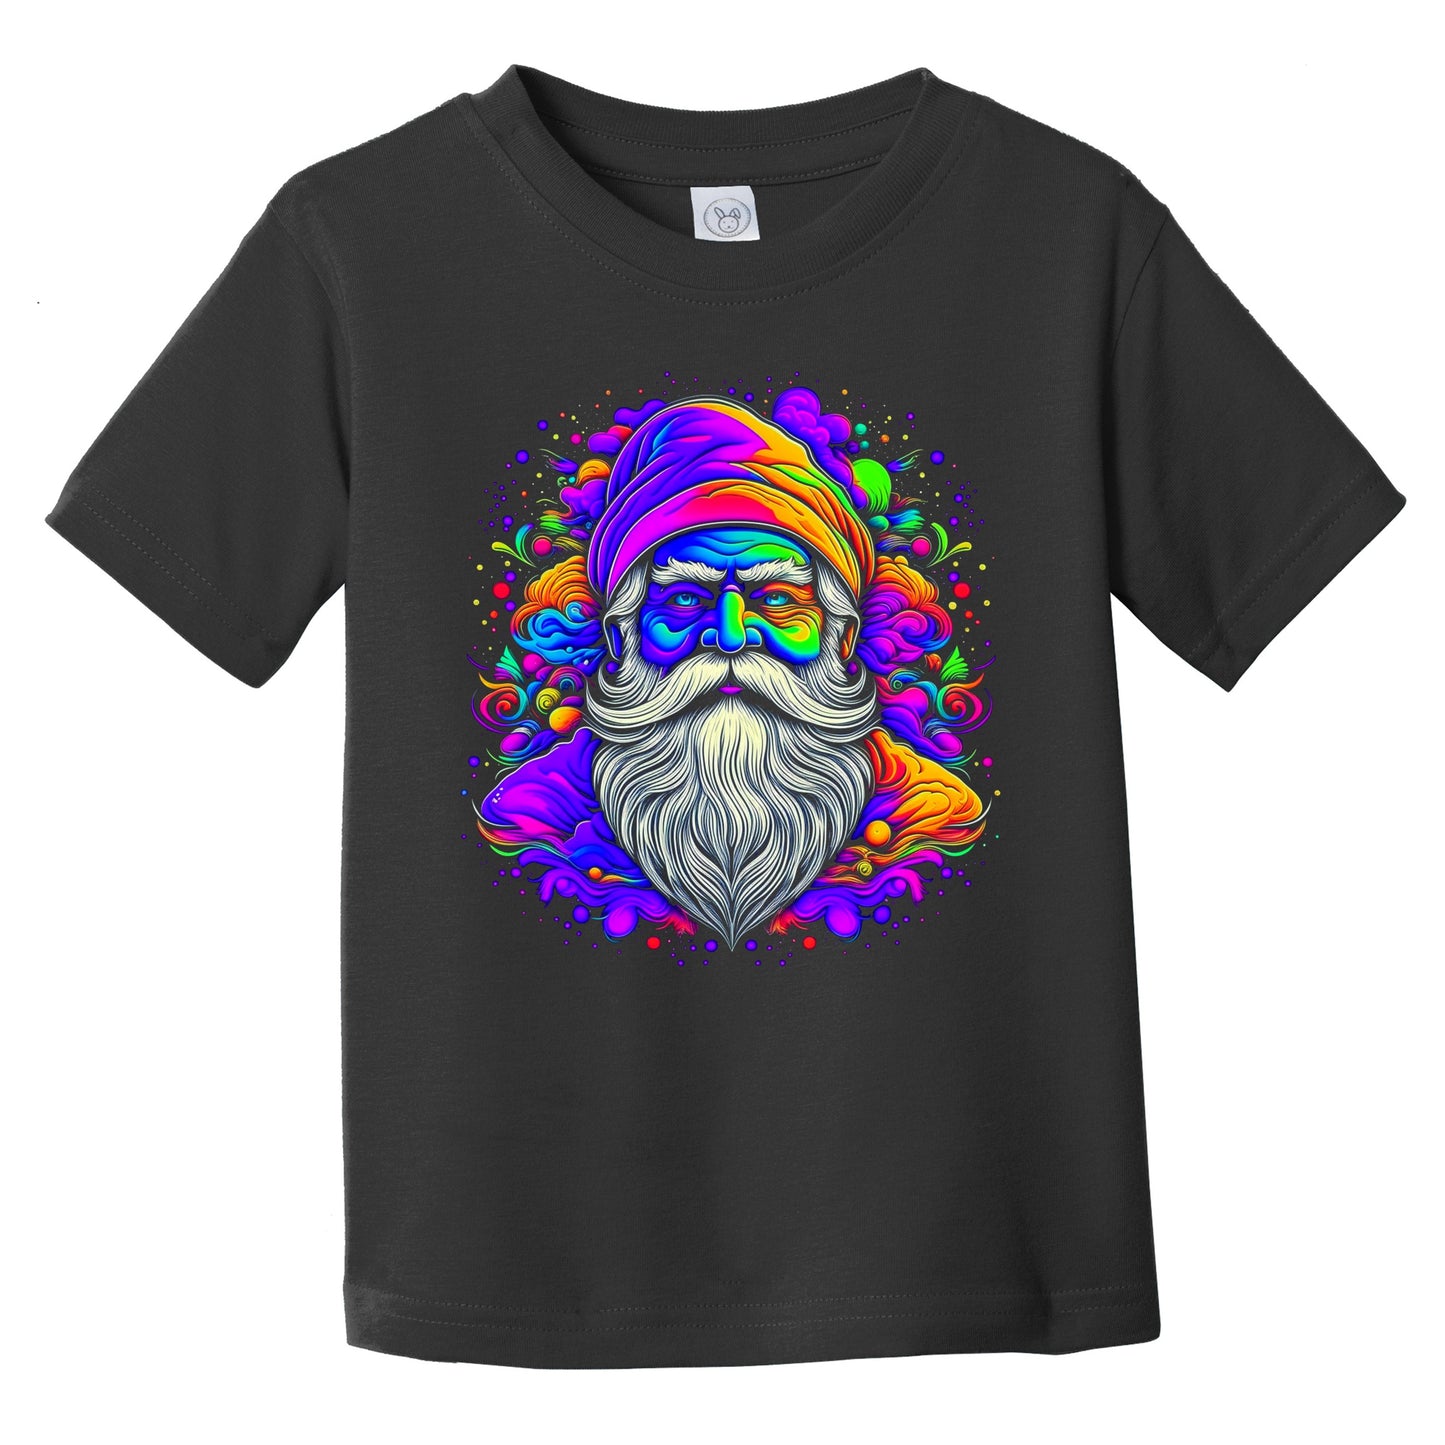 Colorful Bright Santa Claus Psychedelic Christmas Art Infant Toddler T-Shirt